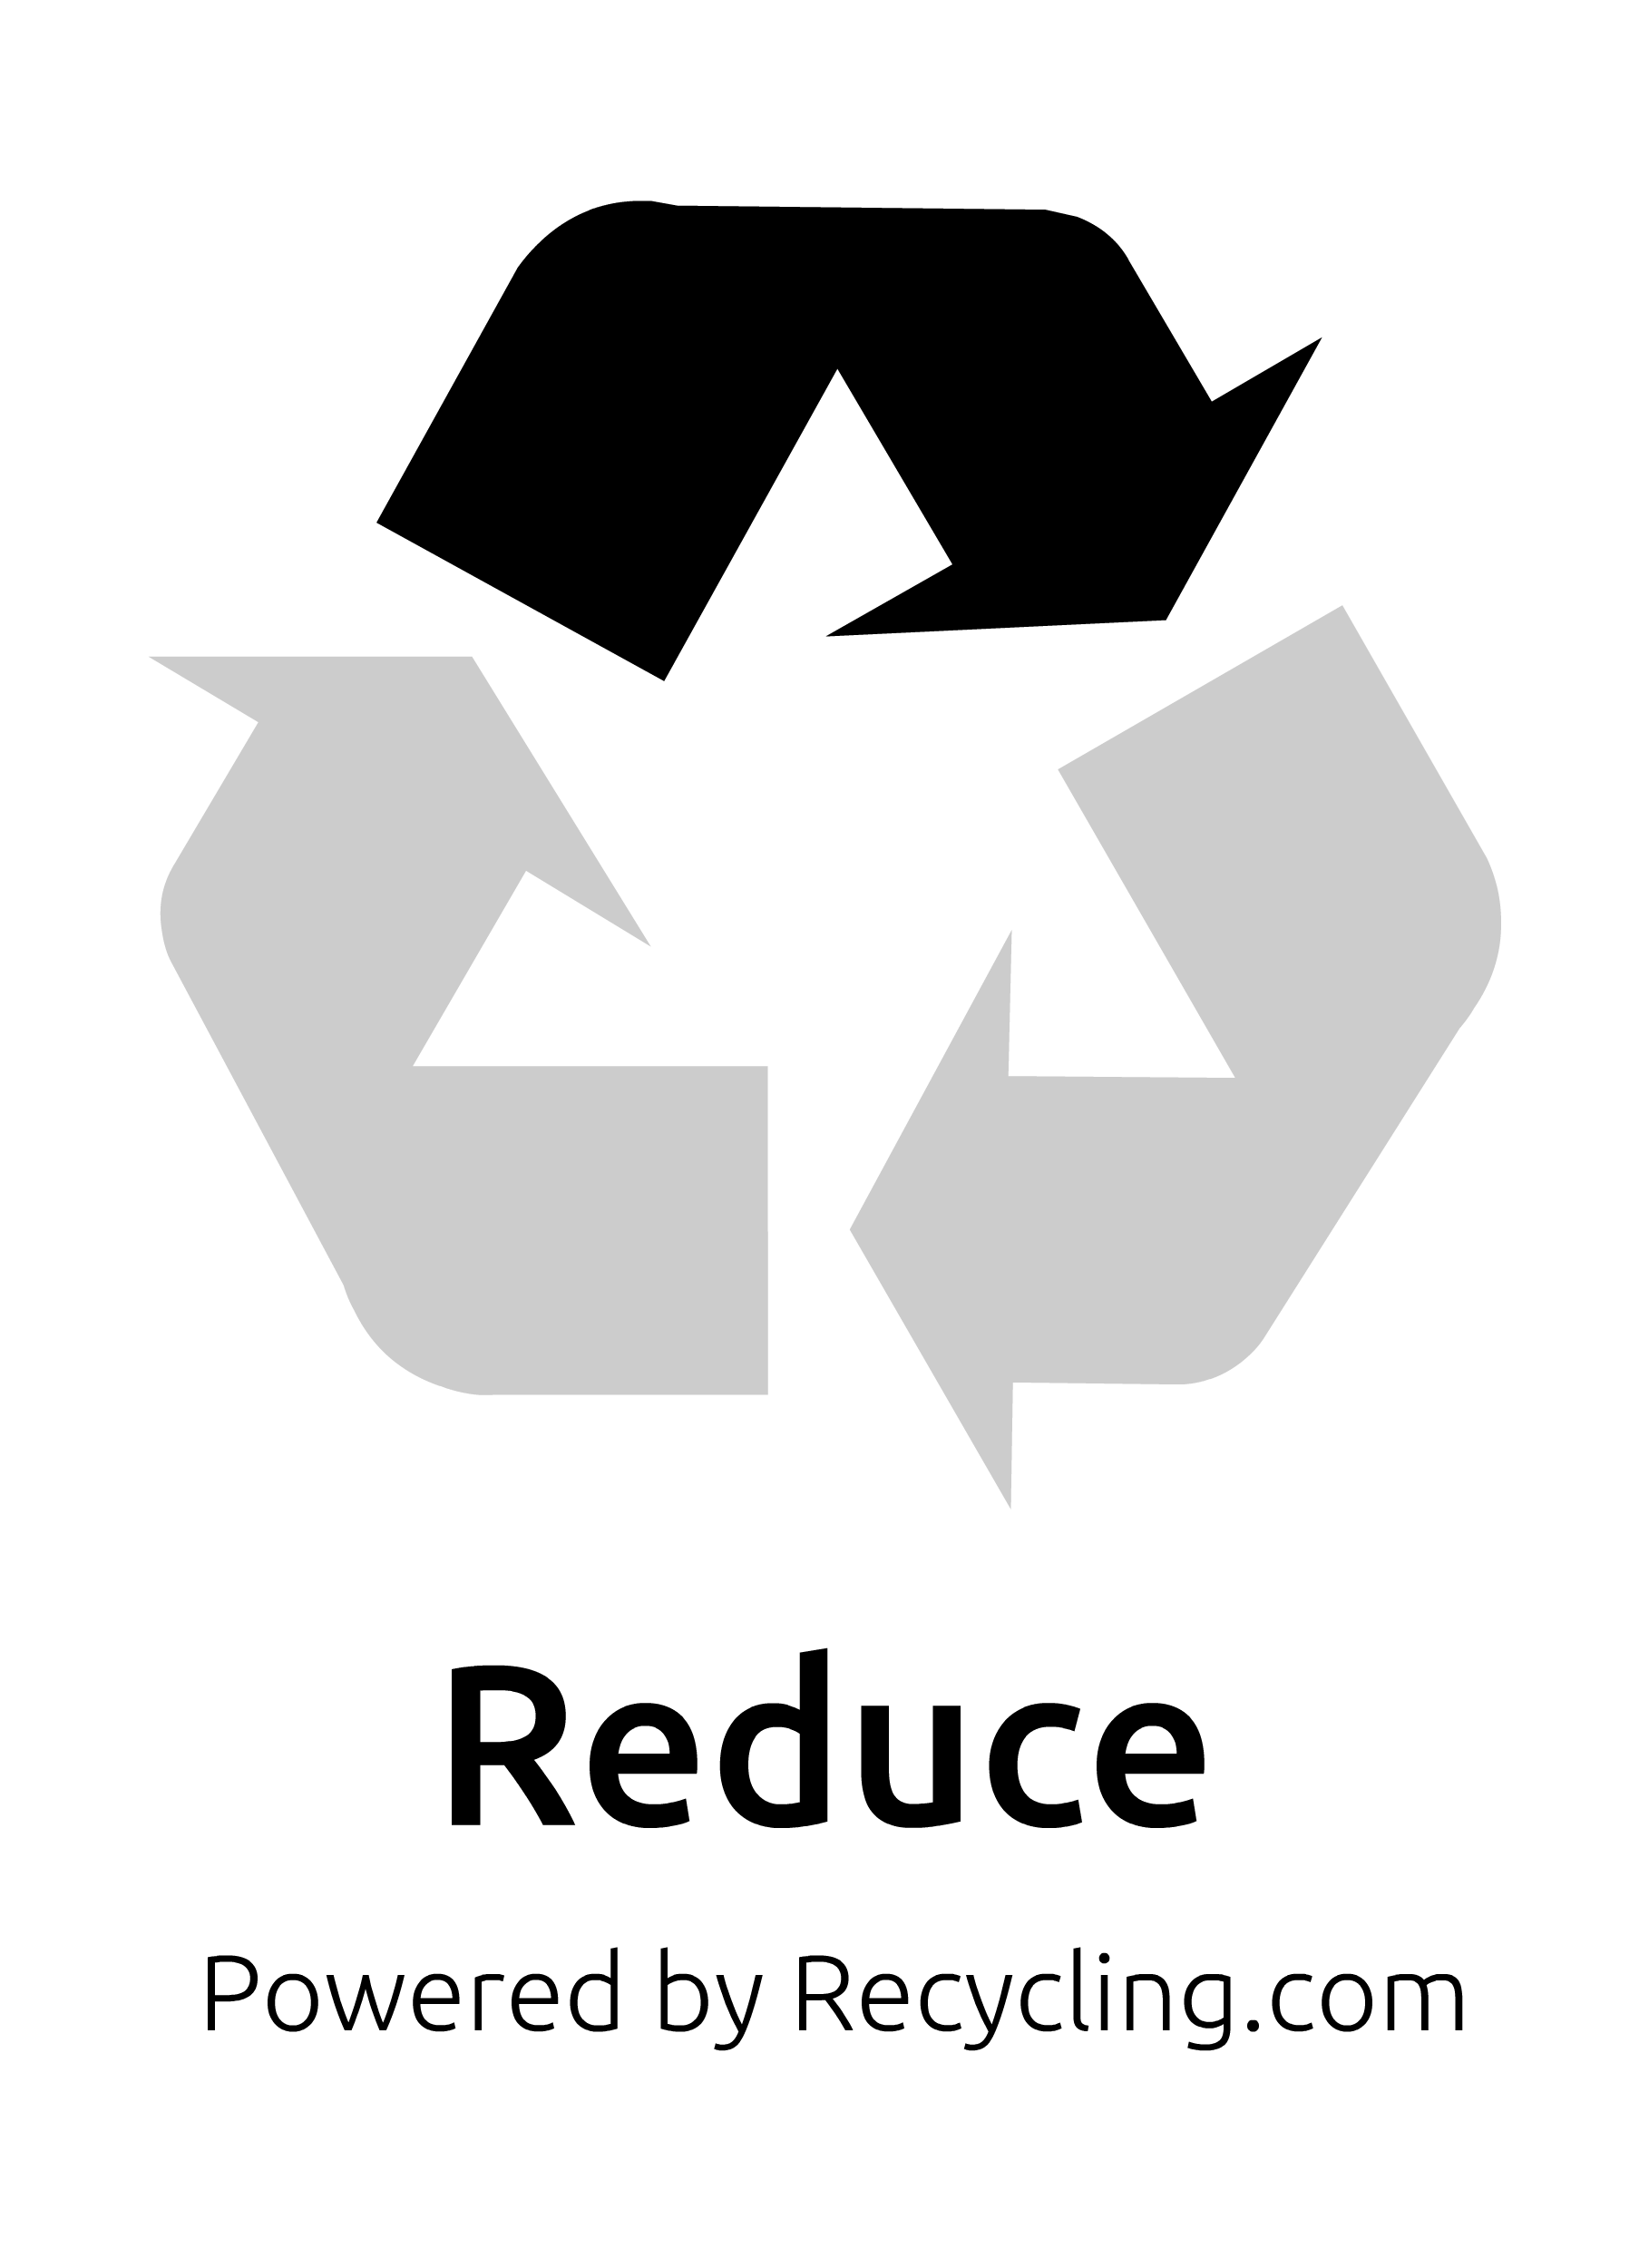 Reduce Logo - The Recycling Trilogy, Reuse, Recycle